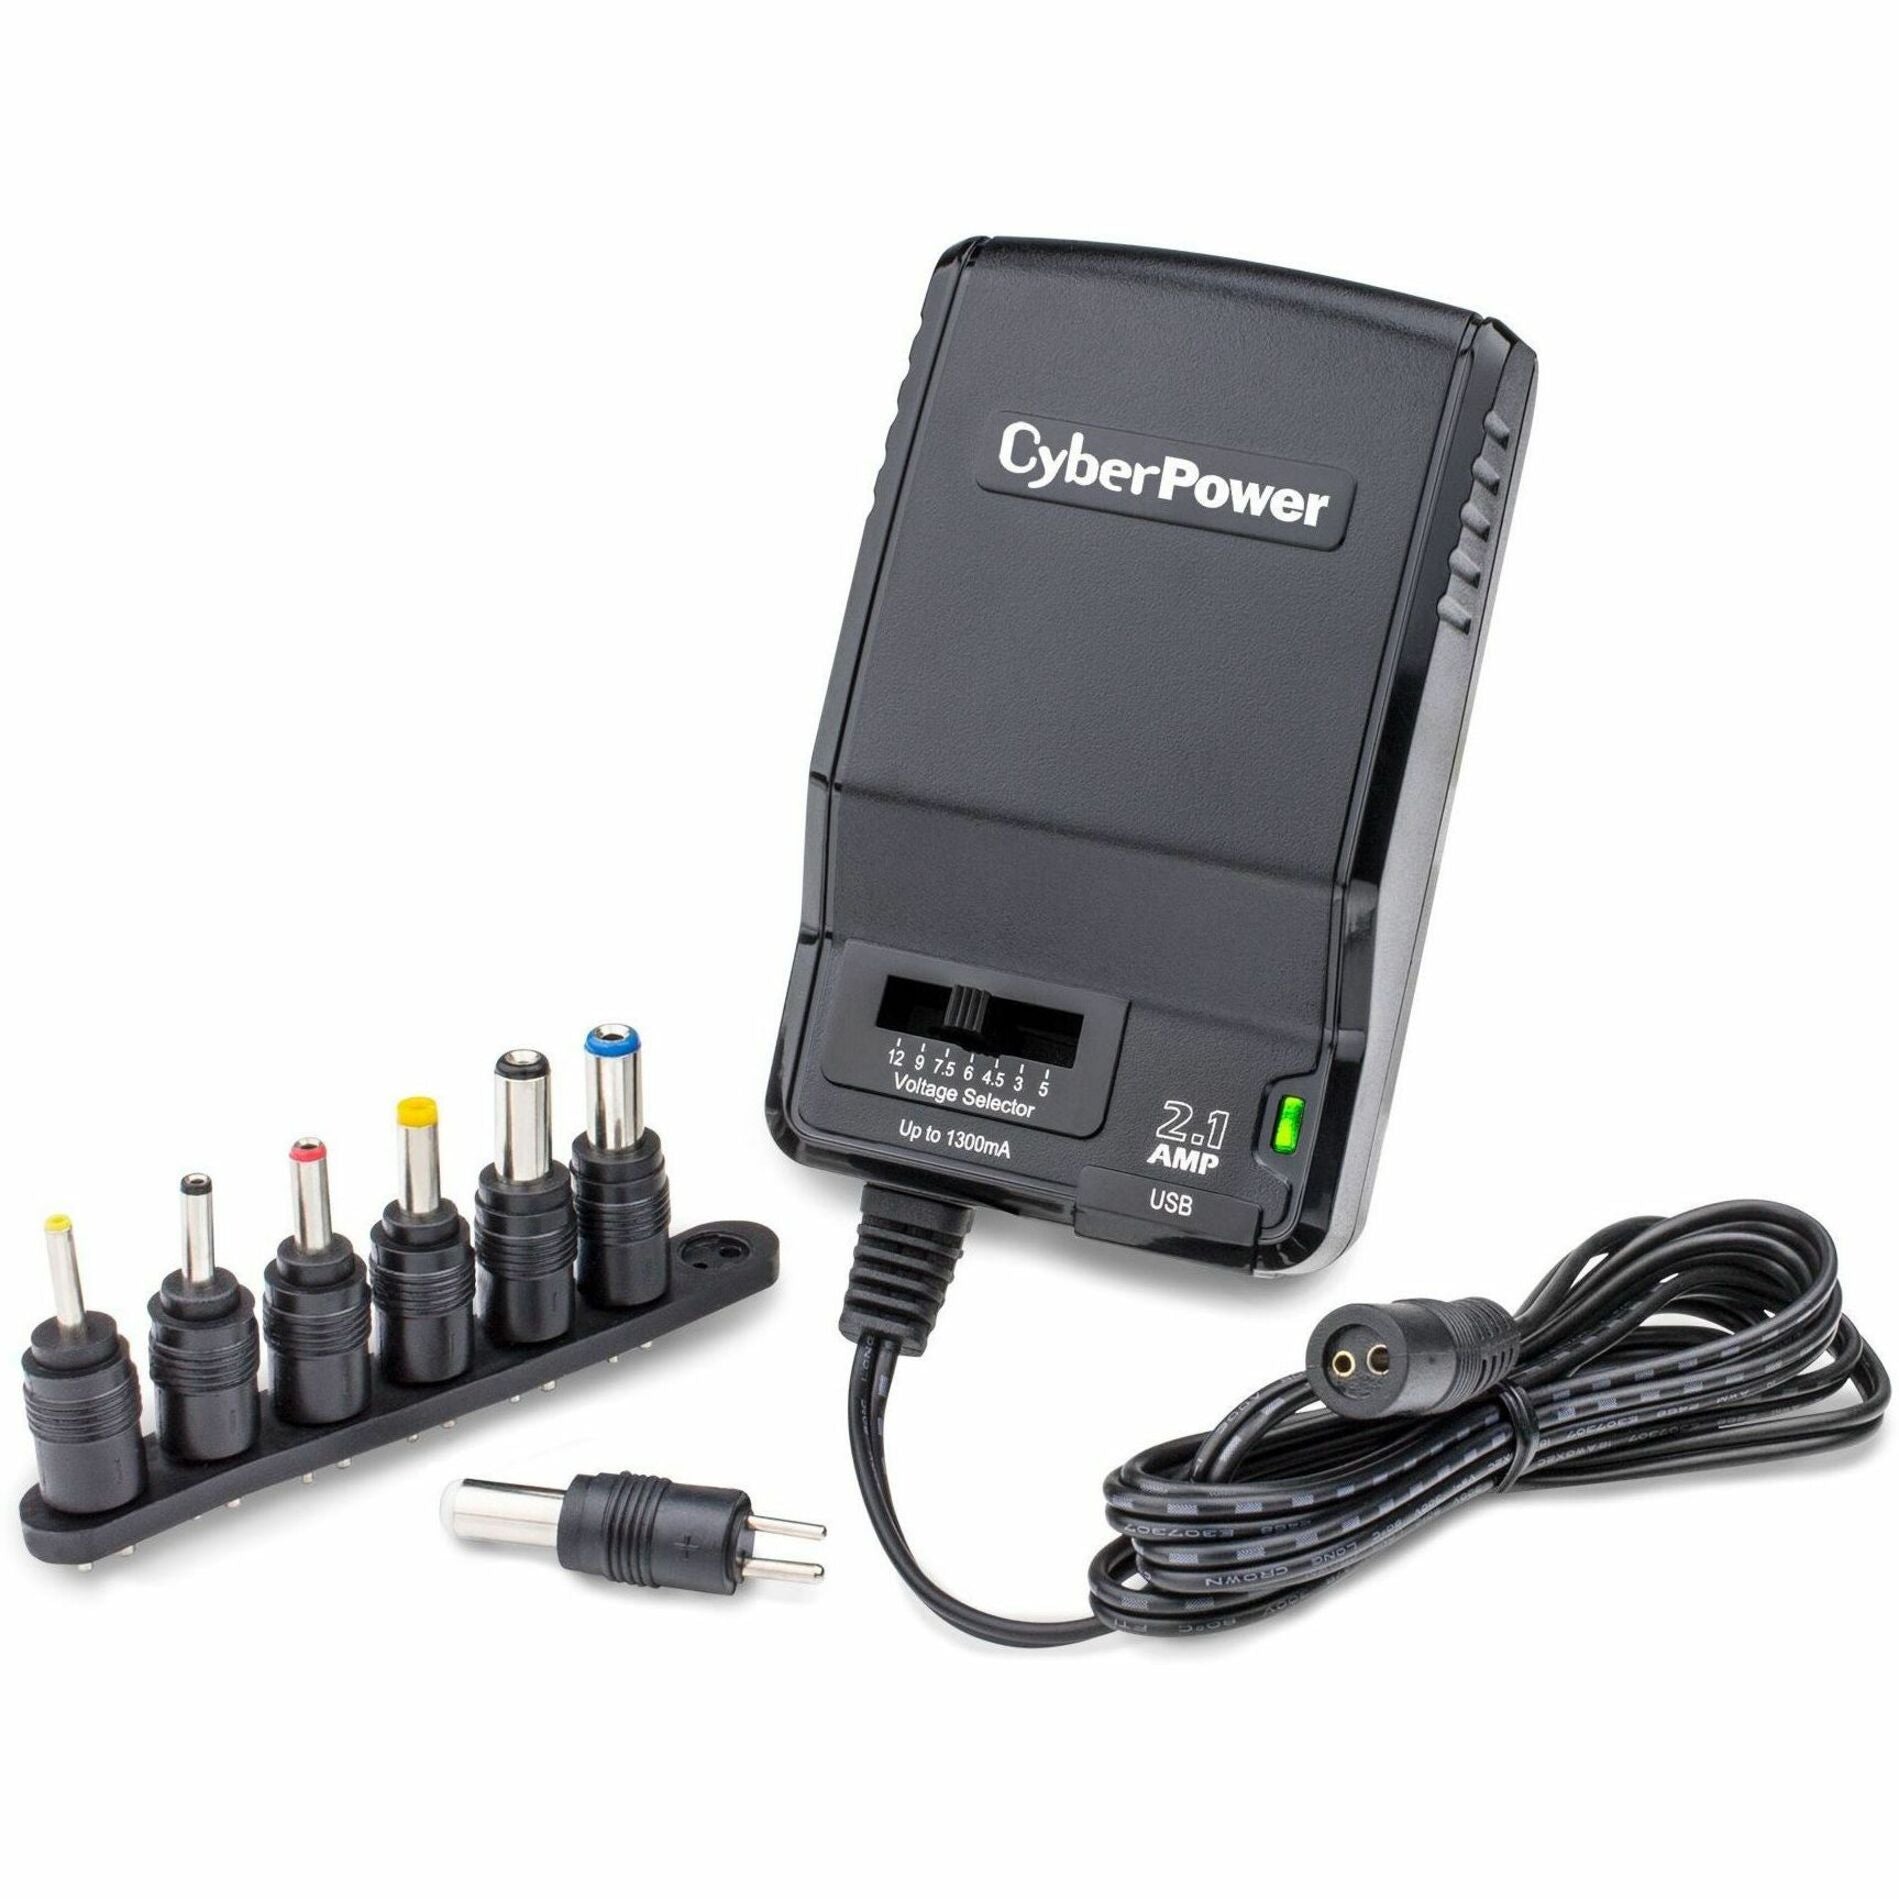 CyberPower CPUAC1U1300 Universal Power Adapter 3-12V 1300mA and AC Power Plug, Multiple Tips, Energy Efficient